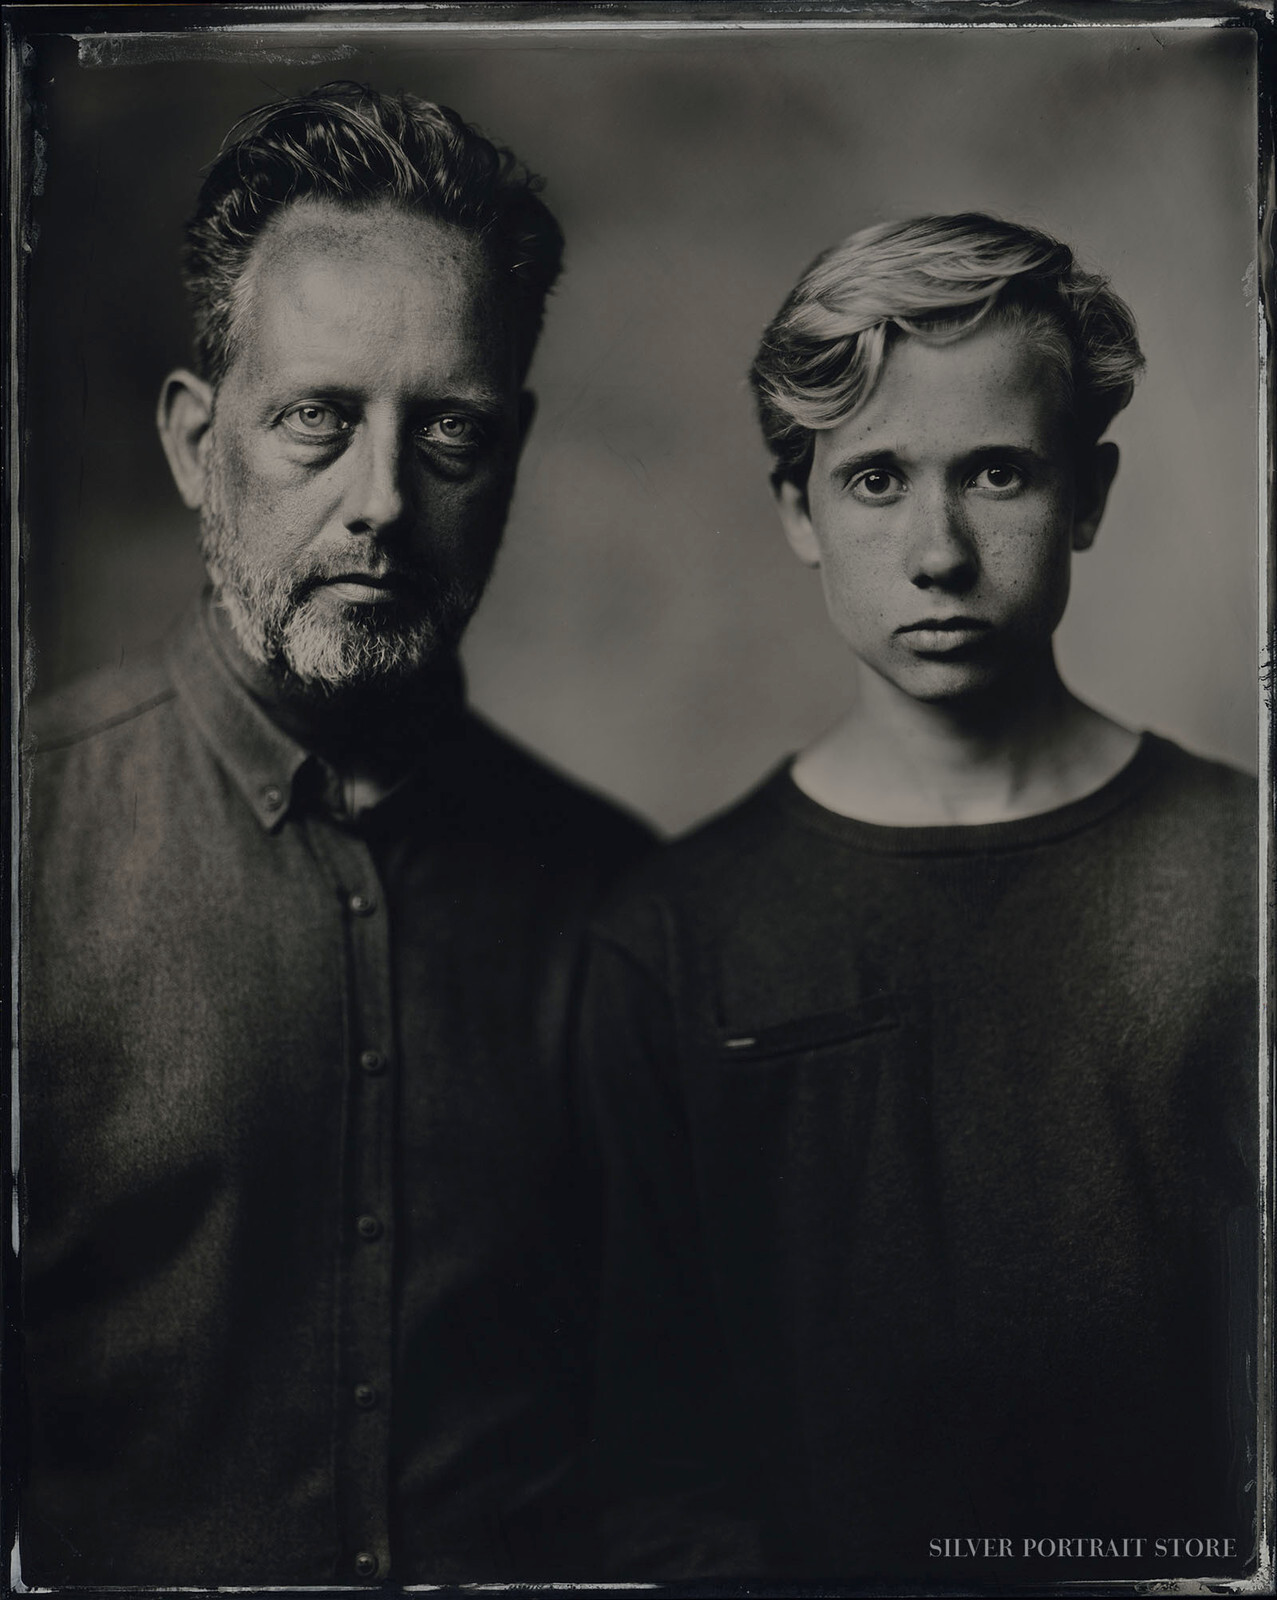 Thierry & Govert-Silver Portrait Store-scan from Wet plate collodion-Tintype 20 x 25 cm.